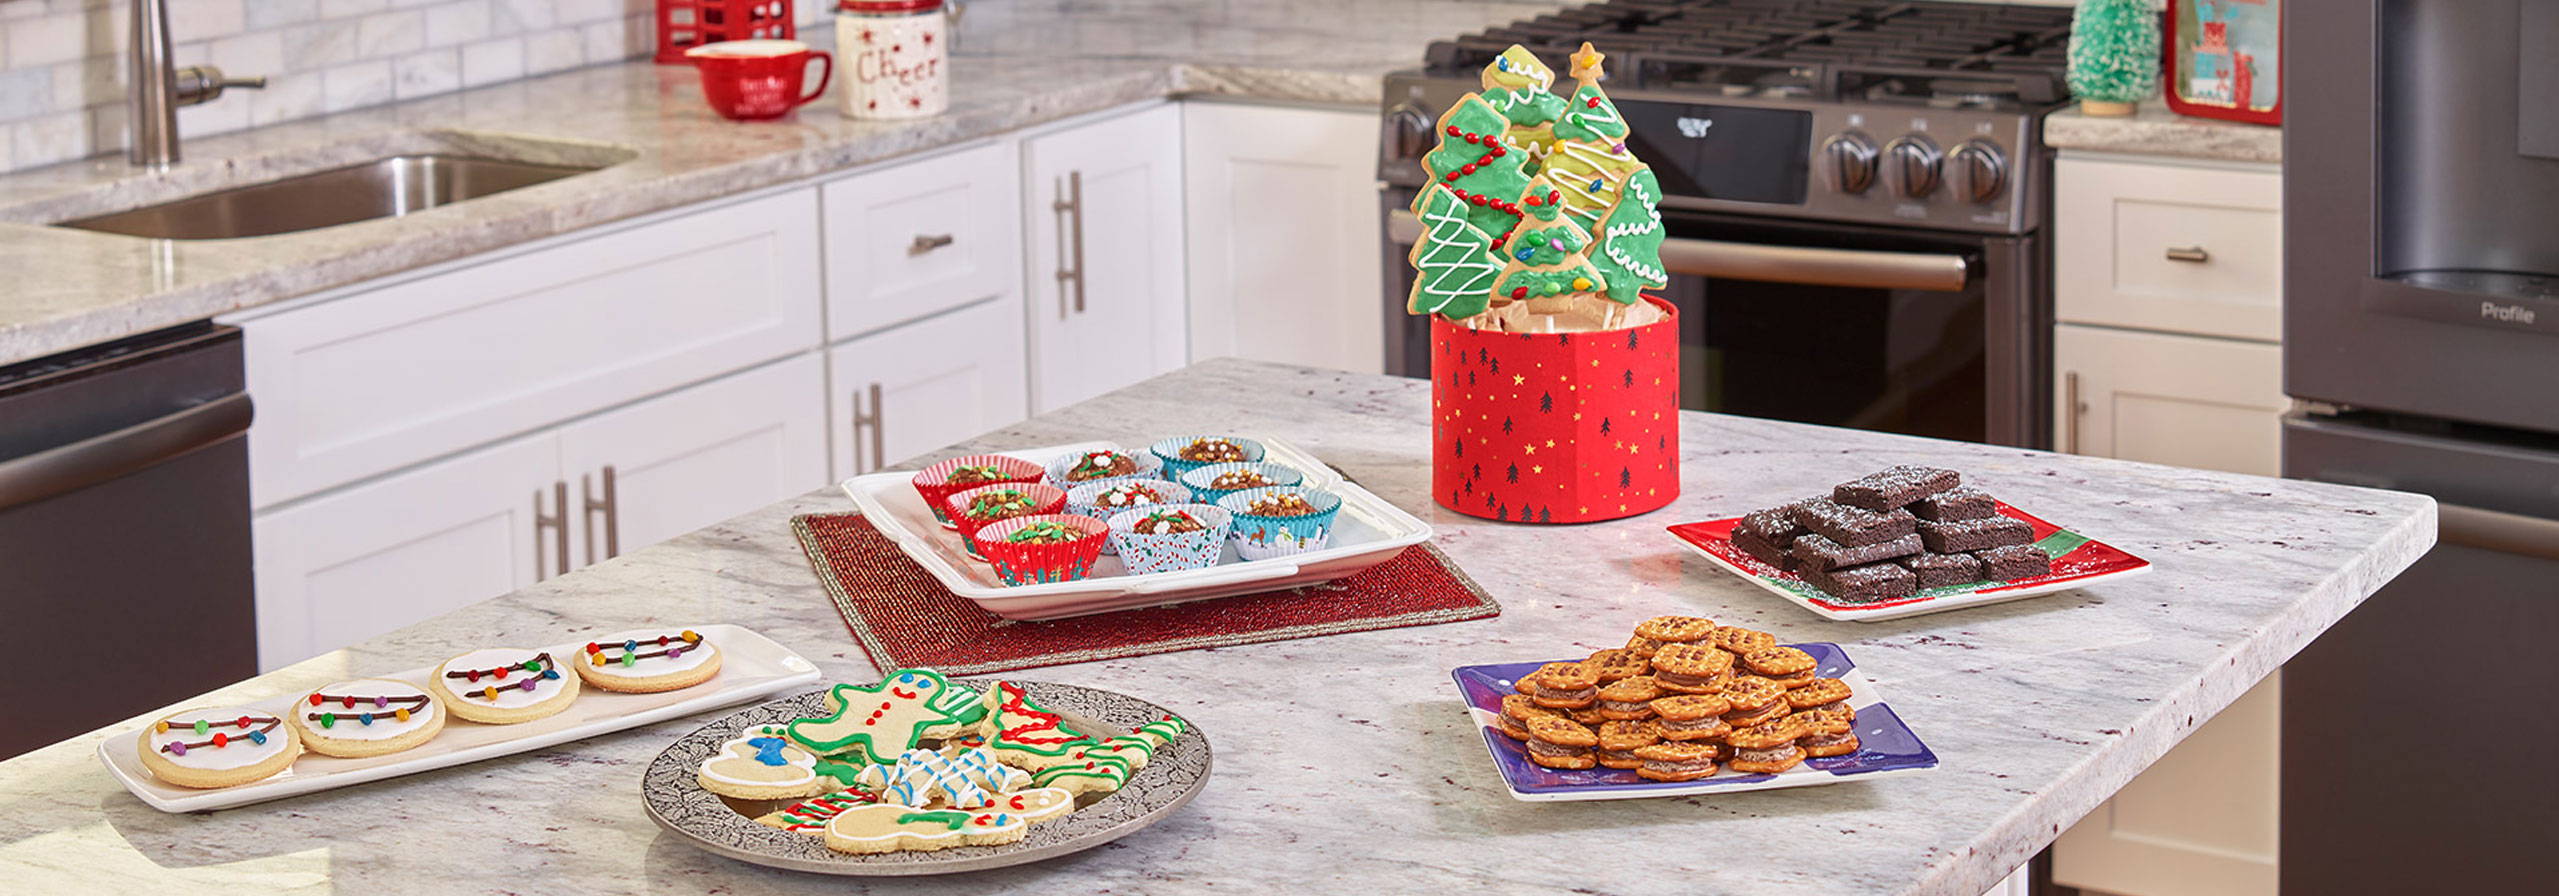 Lots of different holiday cookies on the kitchen island in front of the range and refrigerator.